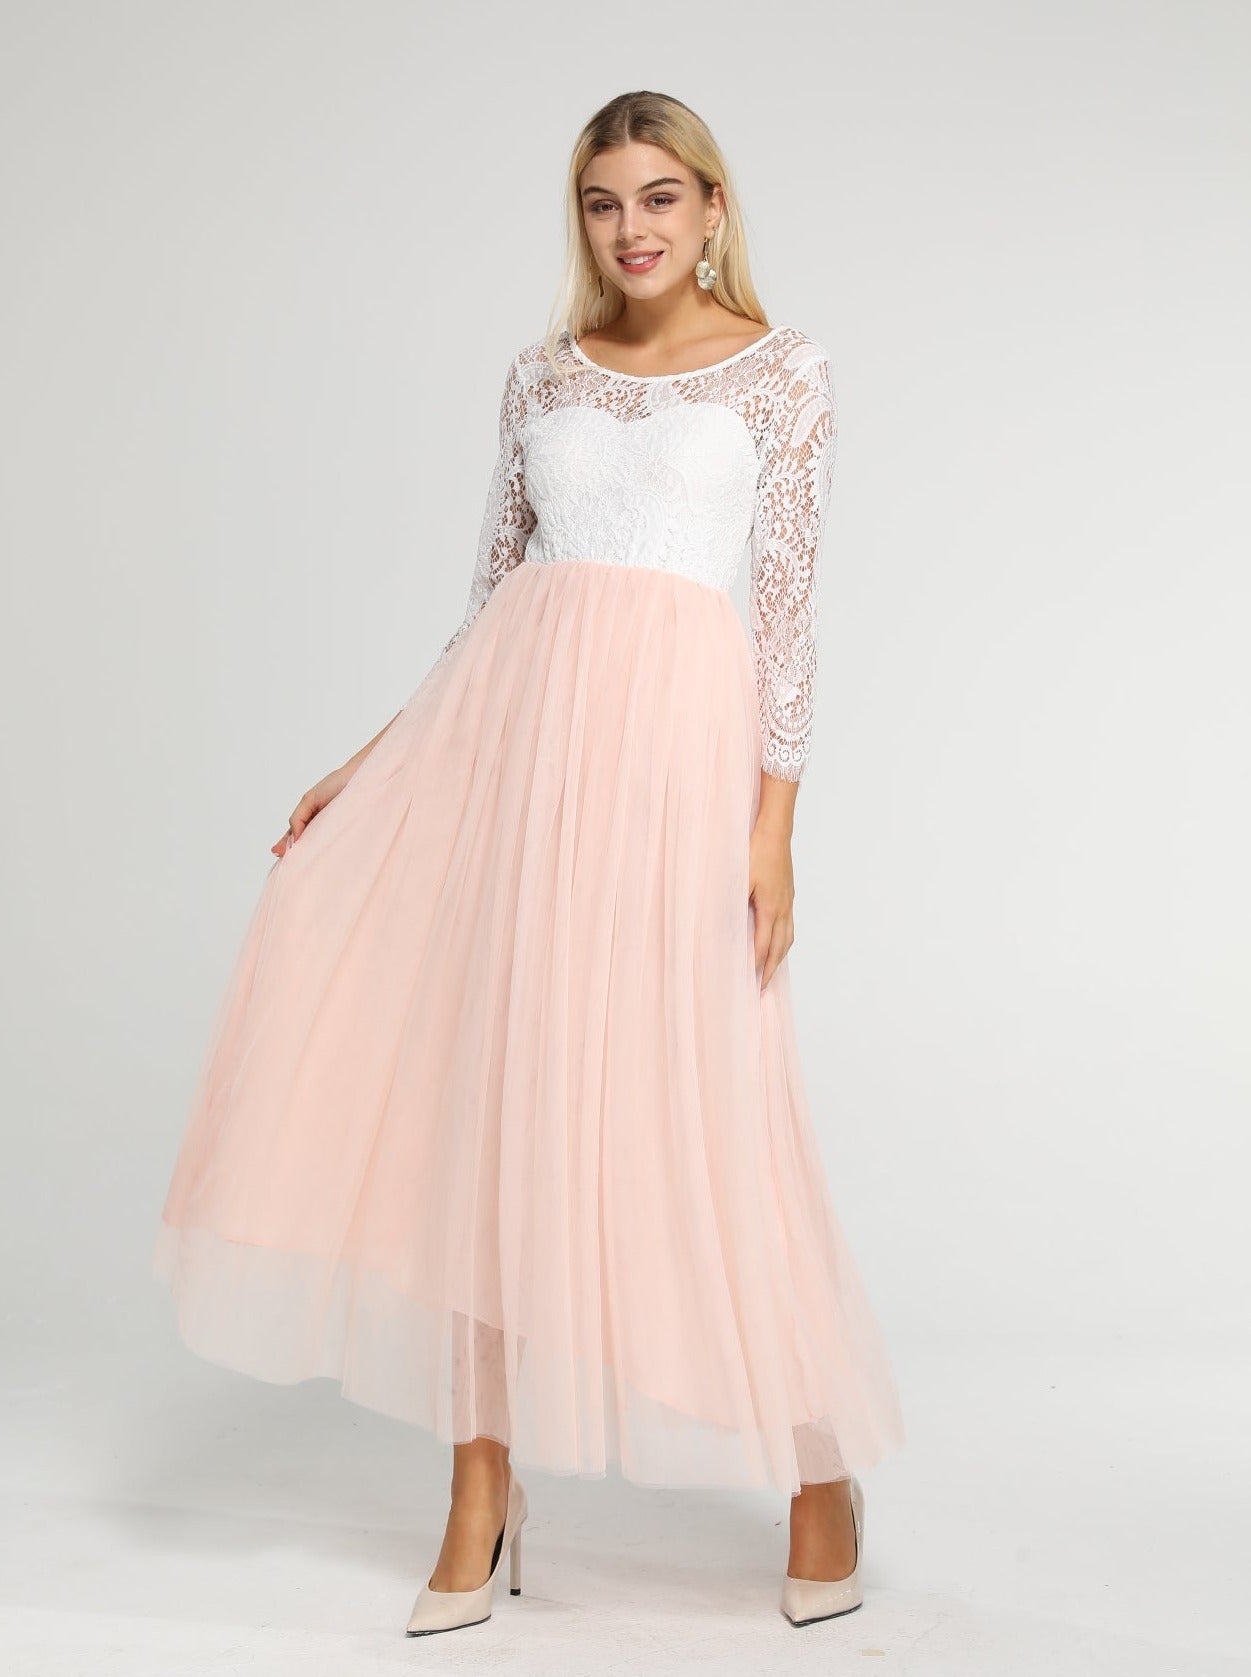 Peony Lace Dress for Women in Pink